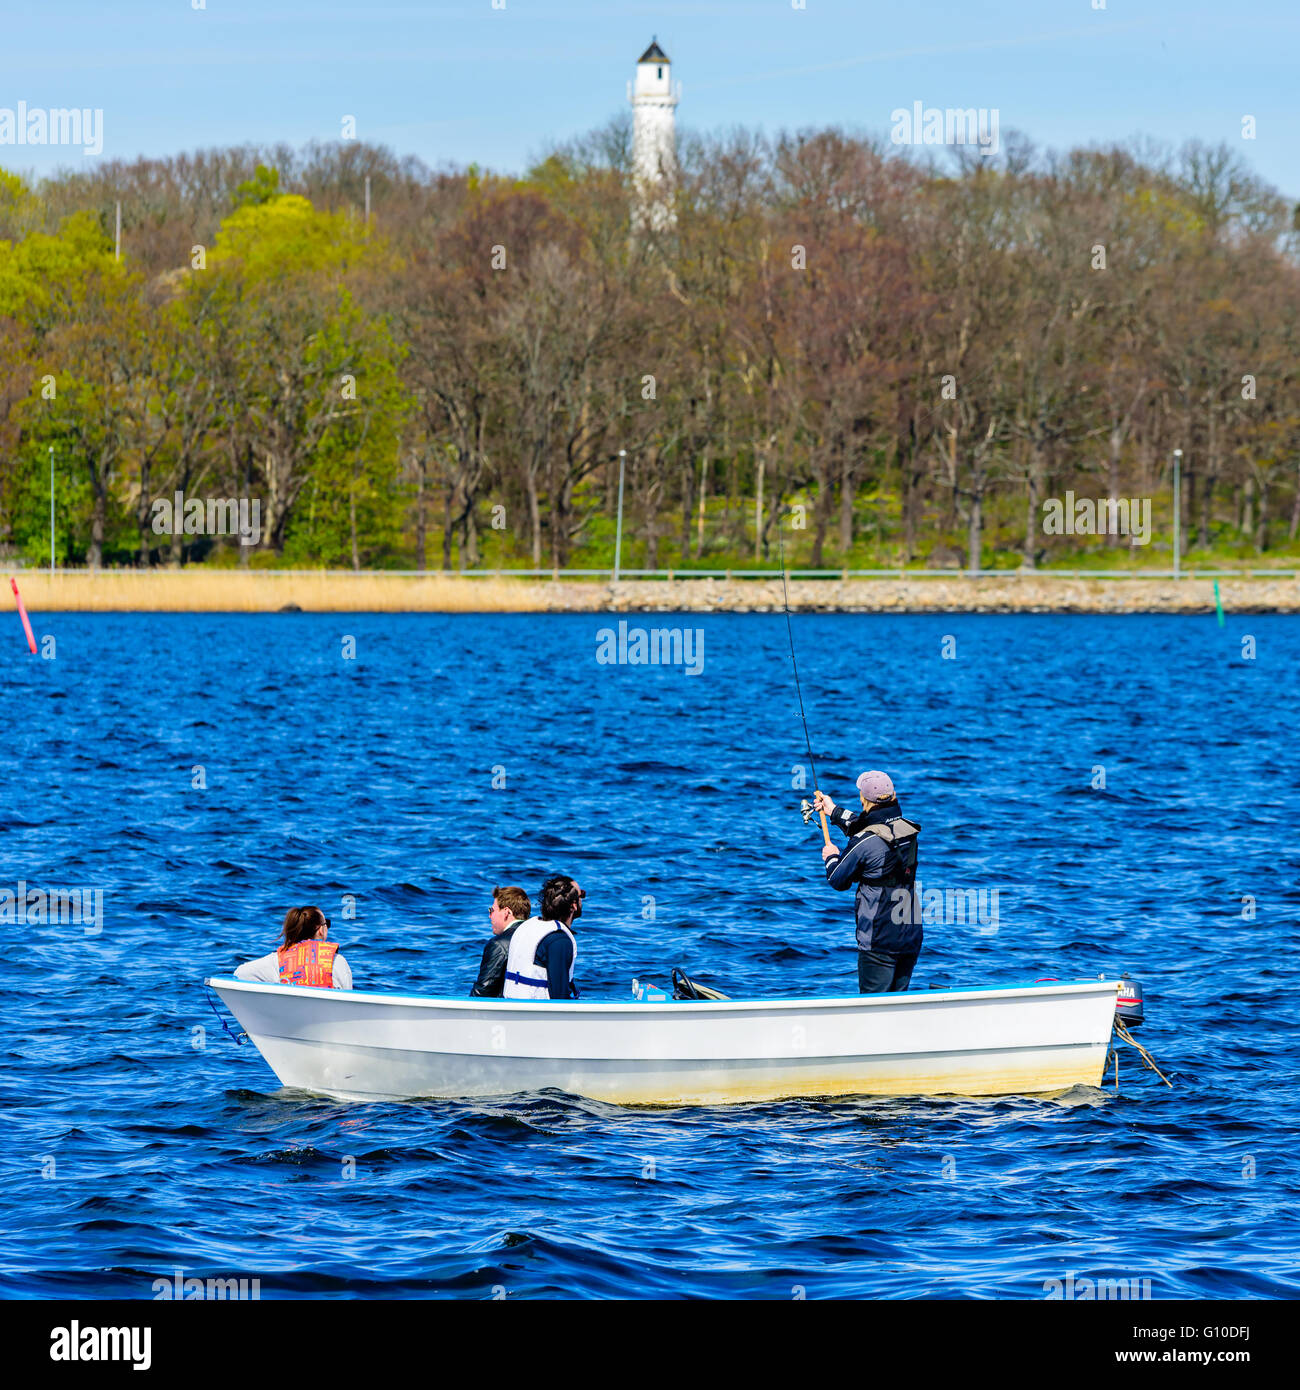 Karlskrona, Sweden - May 03, 2016: Four persons in a small open motorboat fishing at sea with coastline and lighthouse in backgr Stock Photo